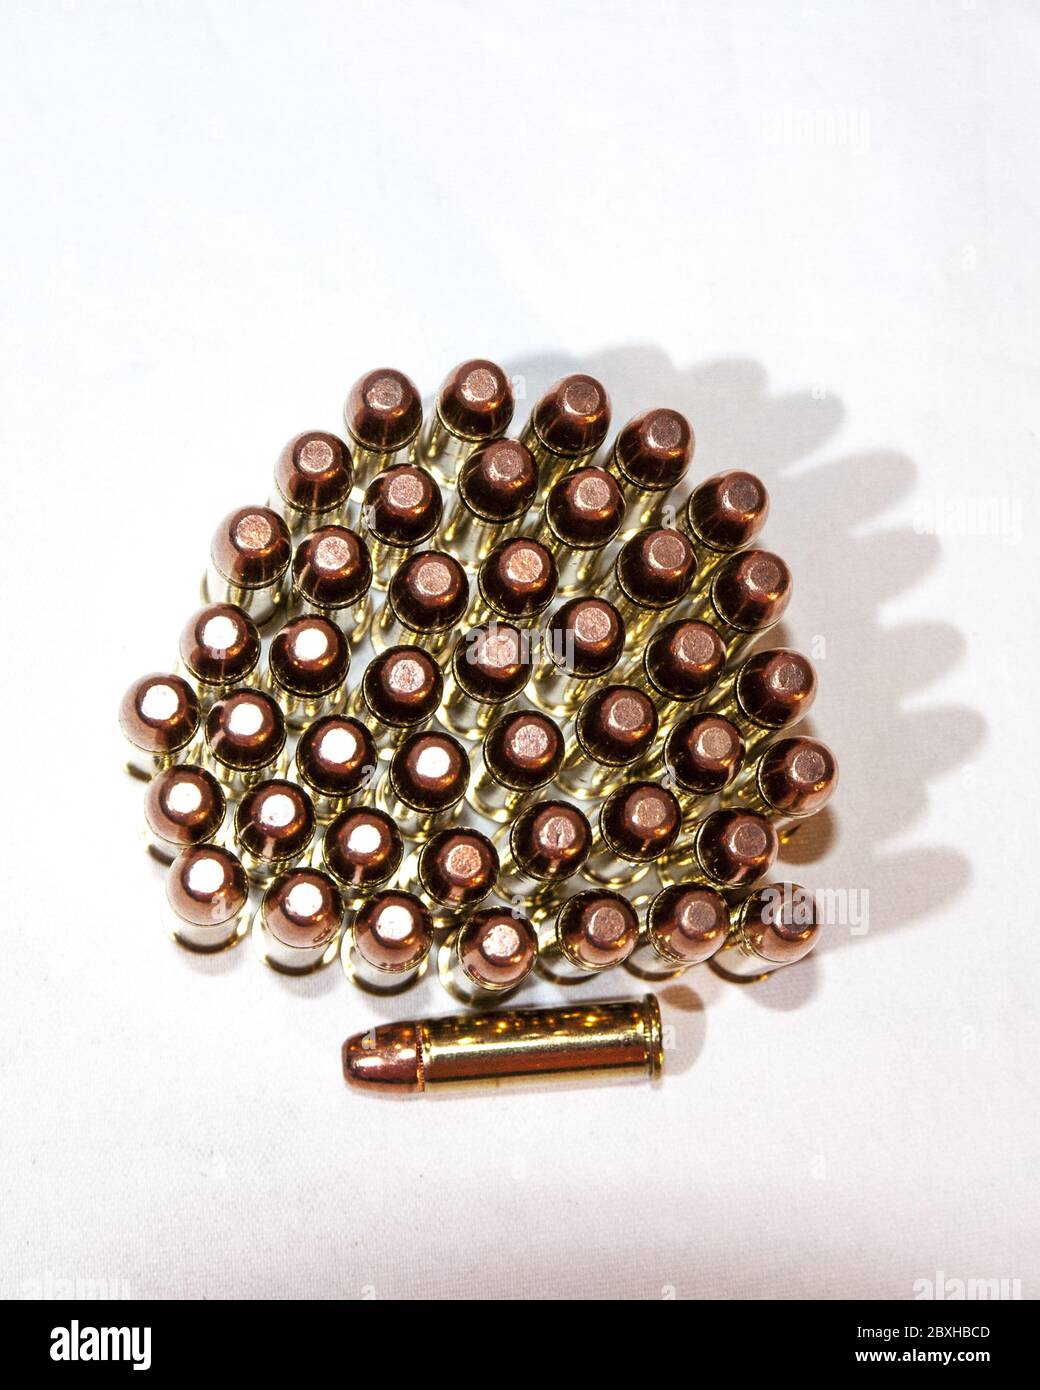 several 22 mm long rifle bullets standing on end on a white background.  One lying down. Stock Photo